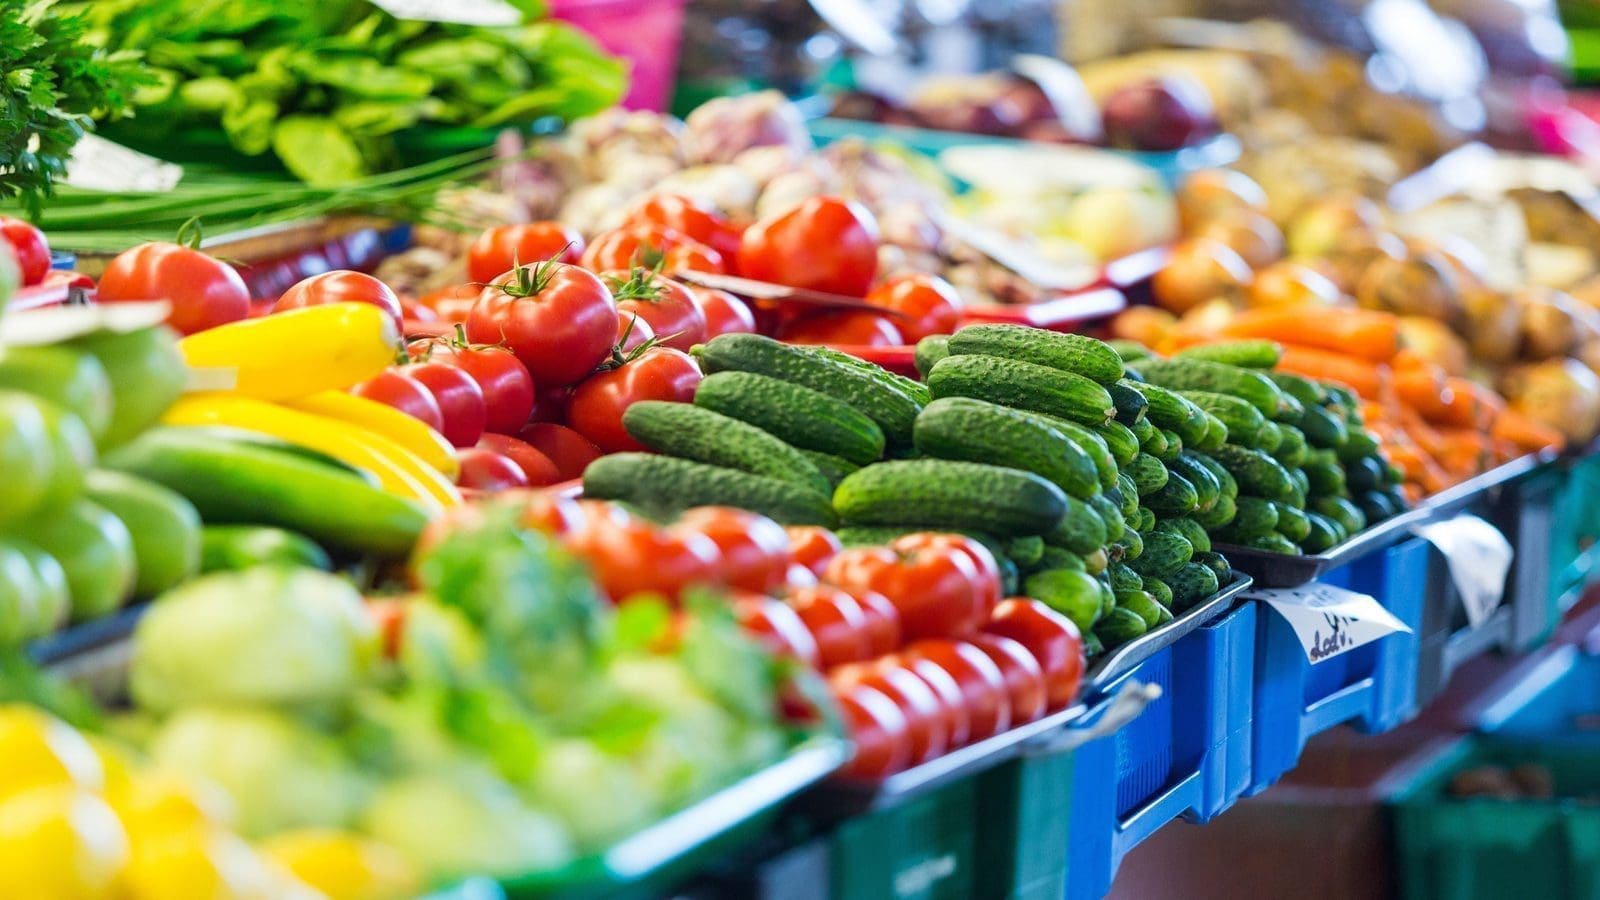 Competition Commission of South Africa polishes lens, looks into fresh produce market